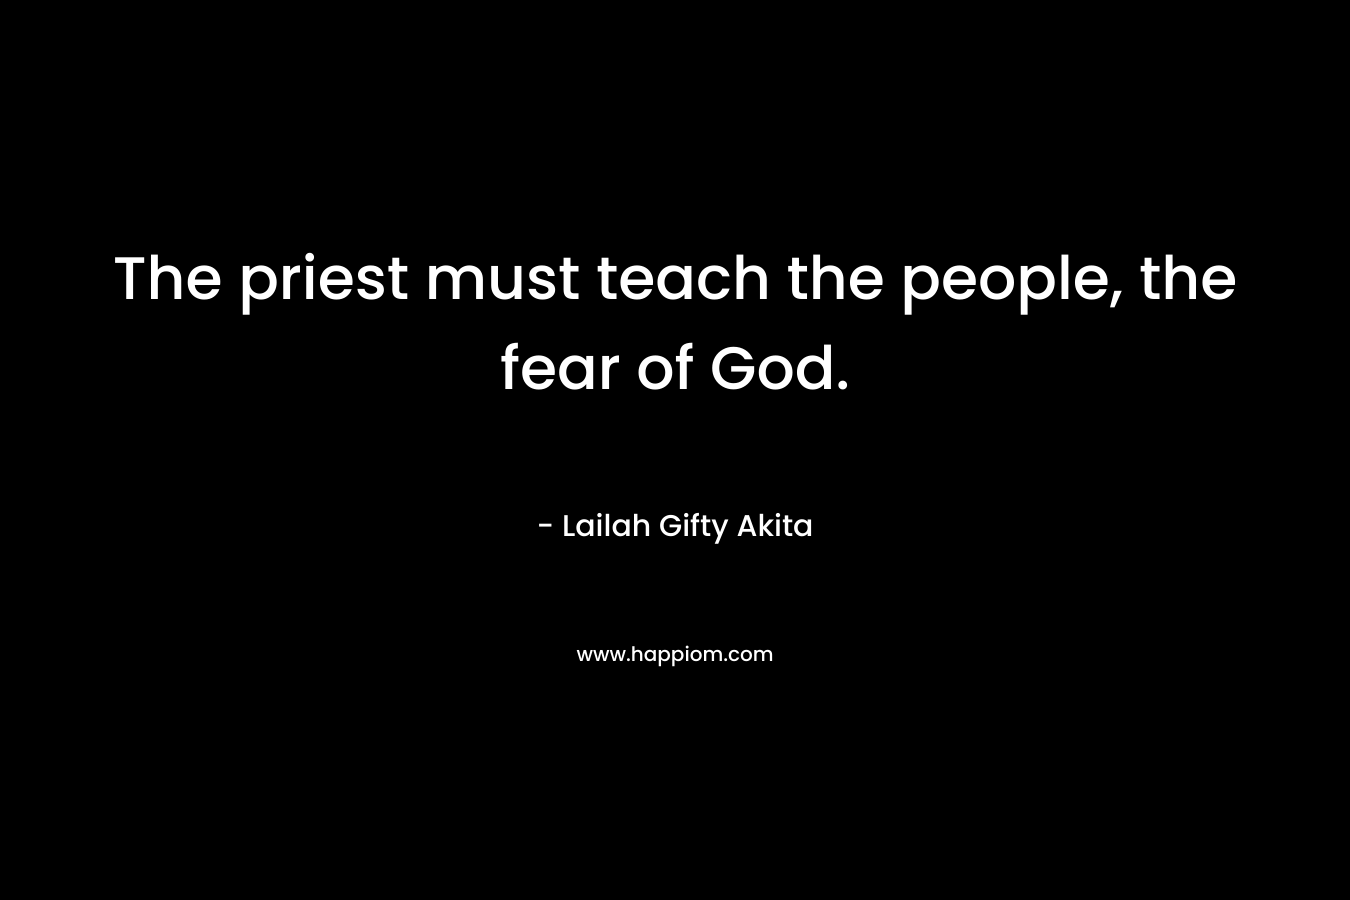 The priest must teach the people, the fear of God.